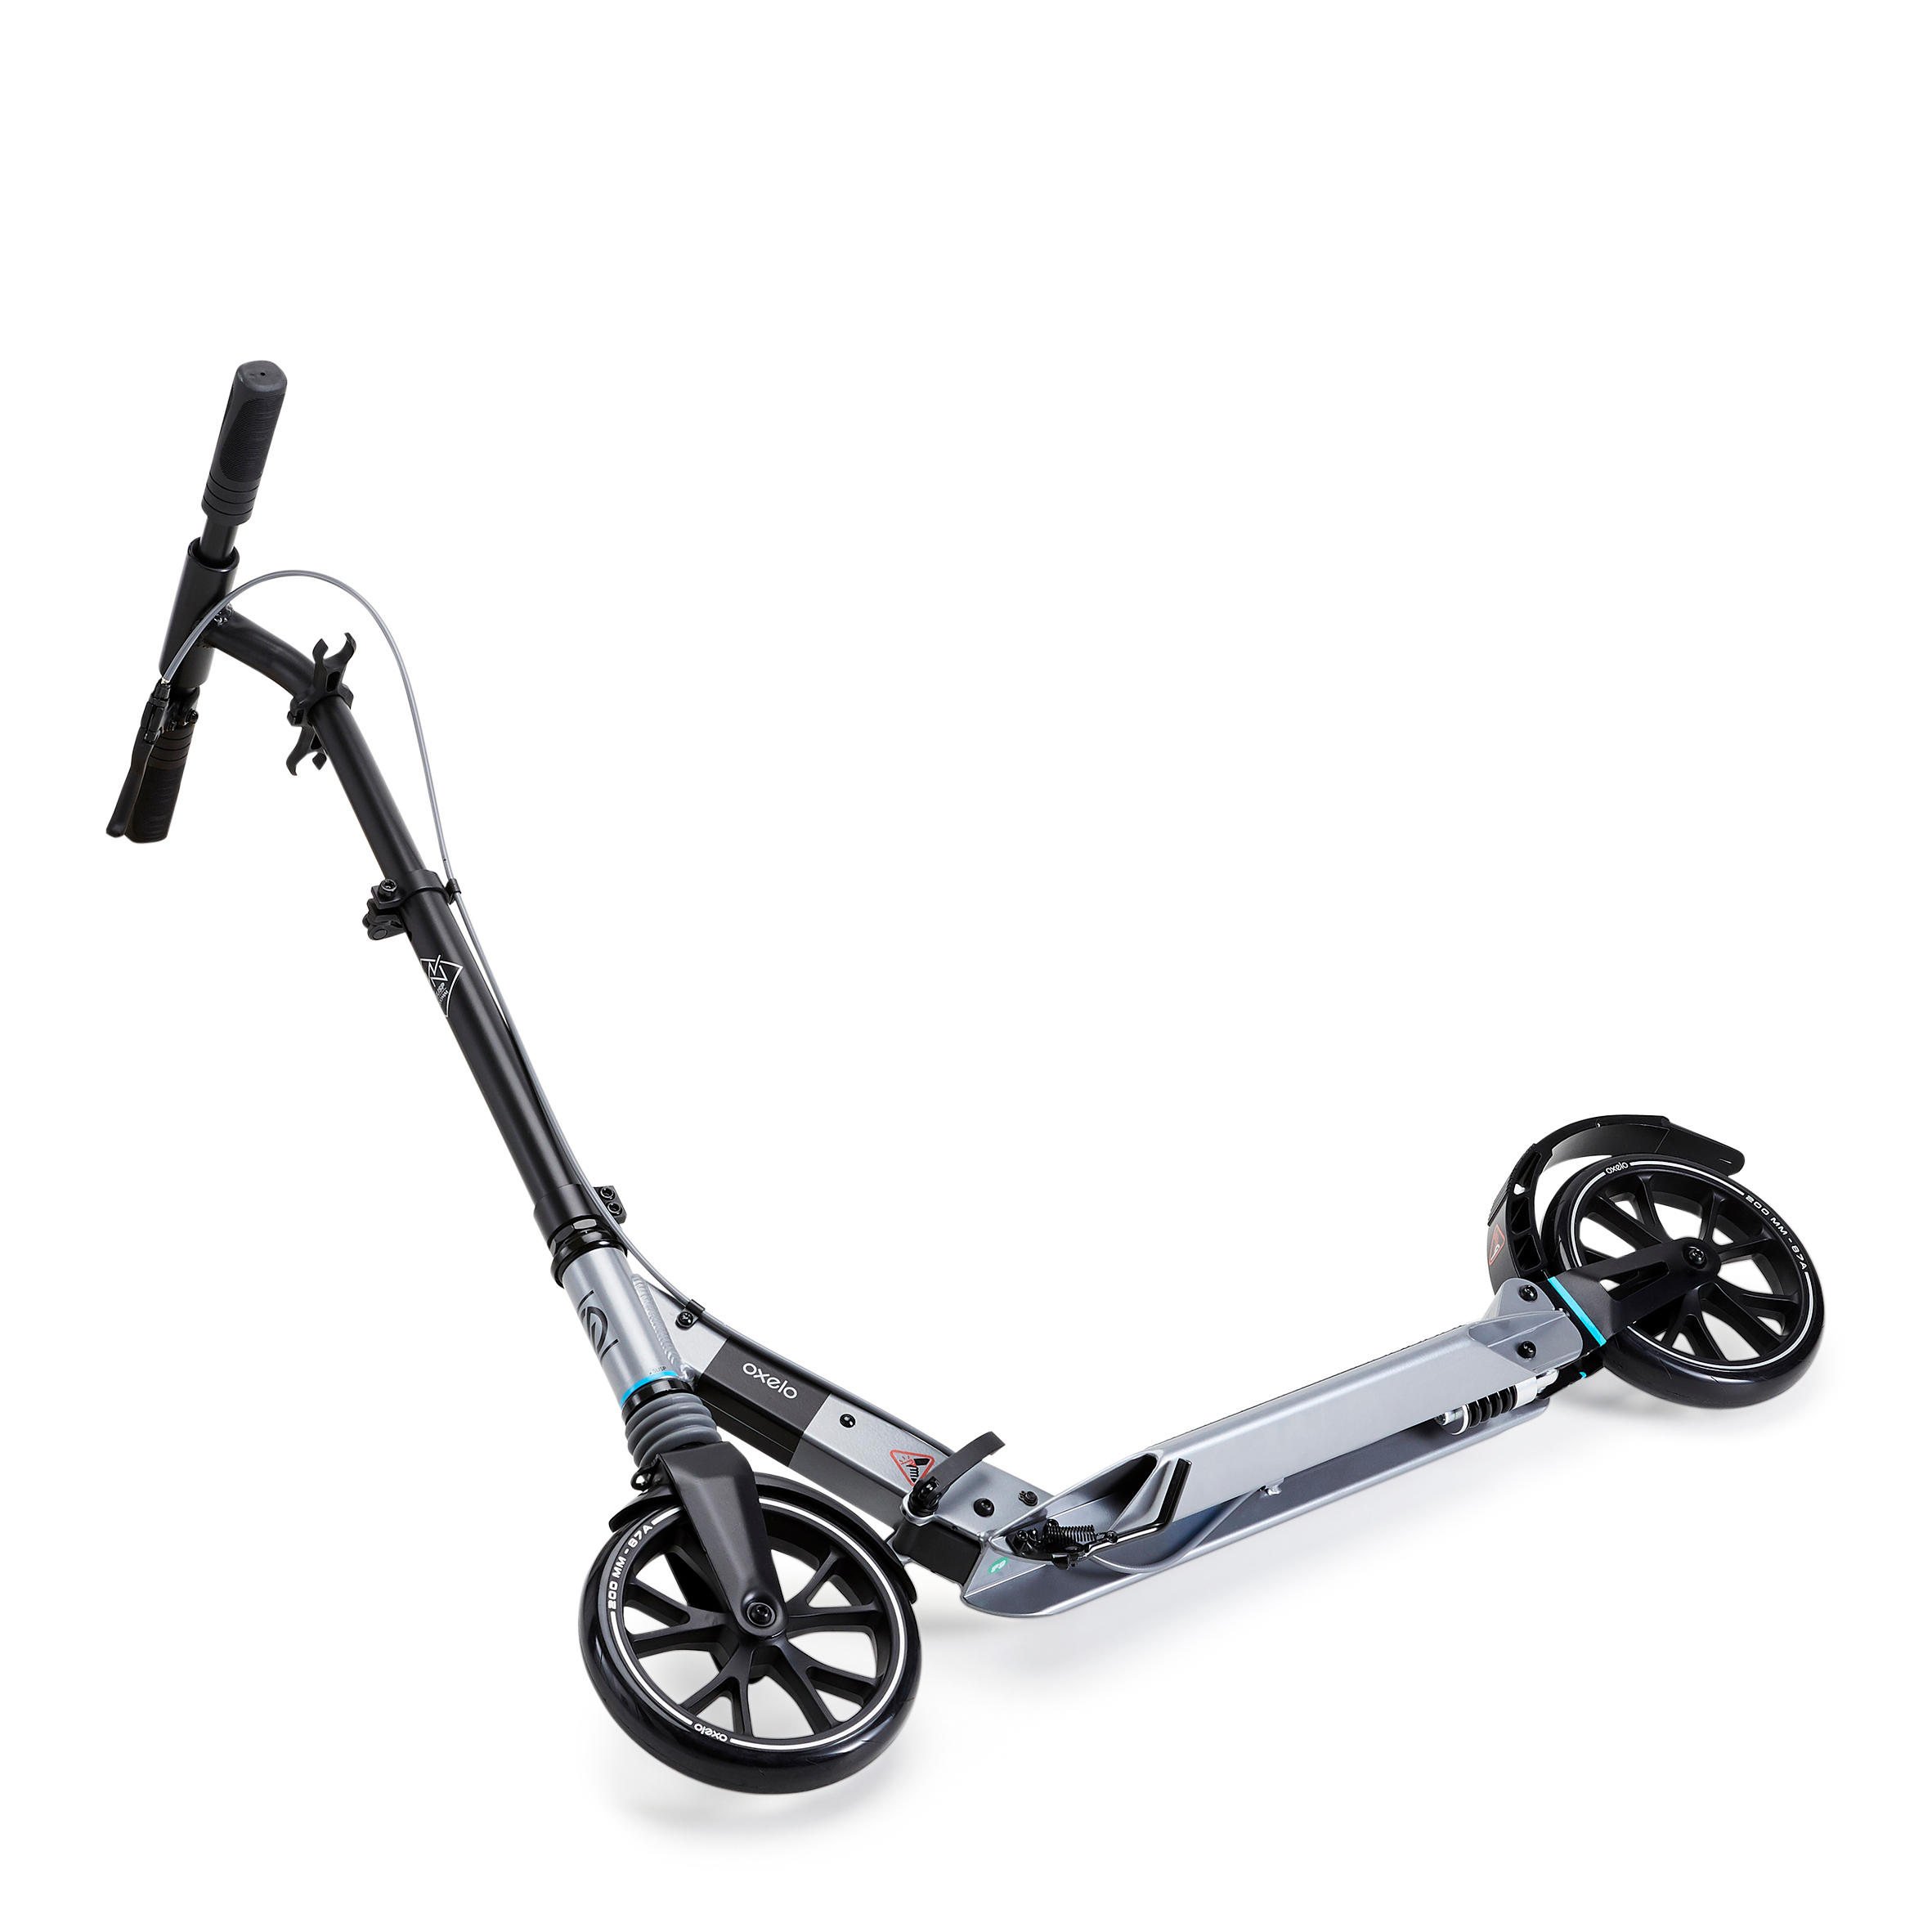 oxelo town 7xl scooter review